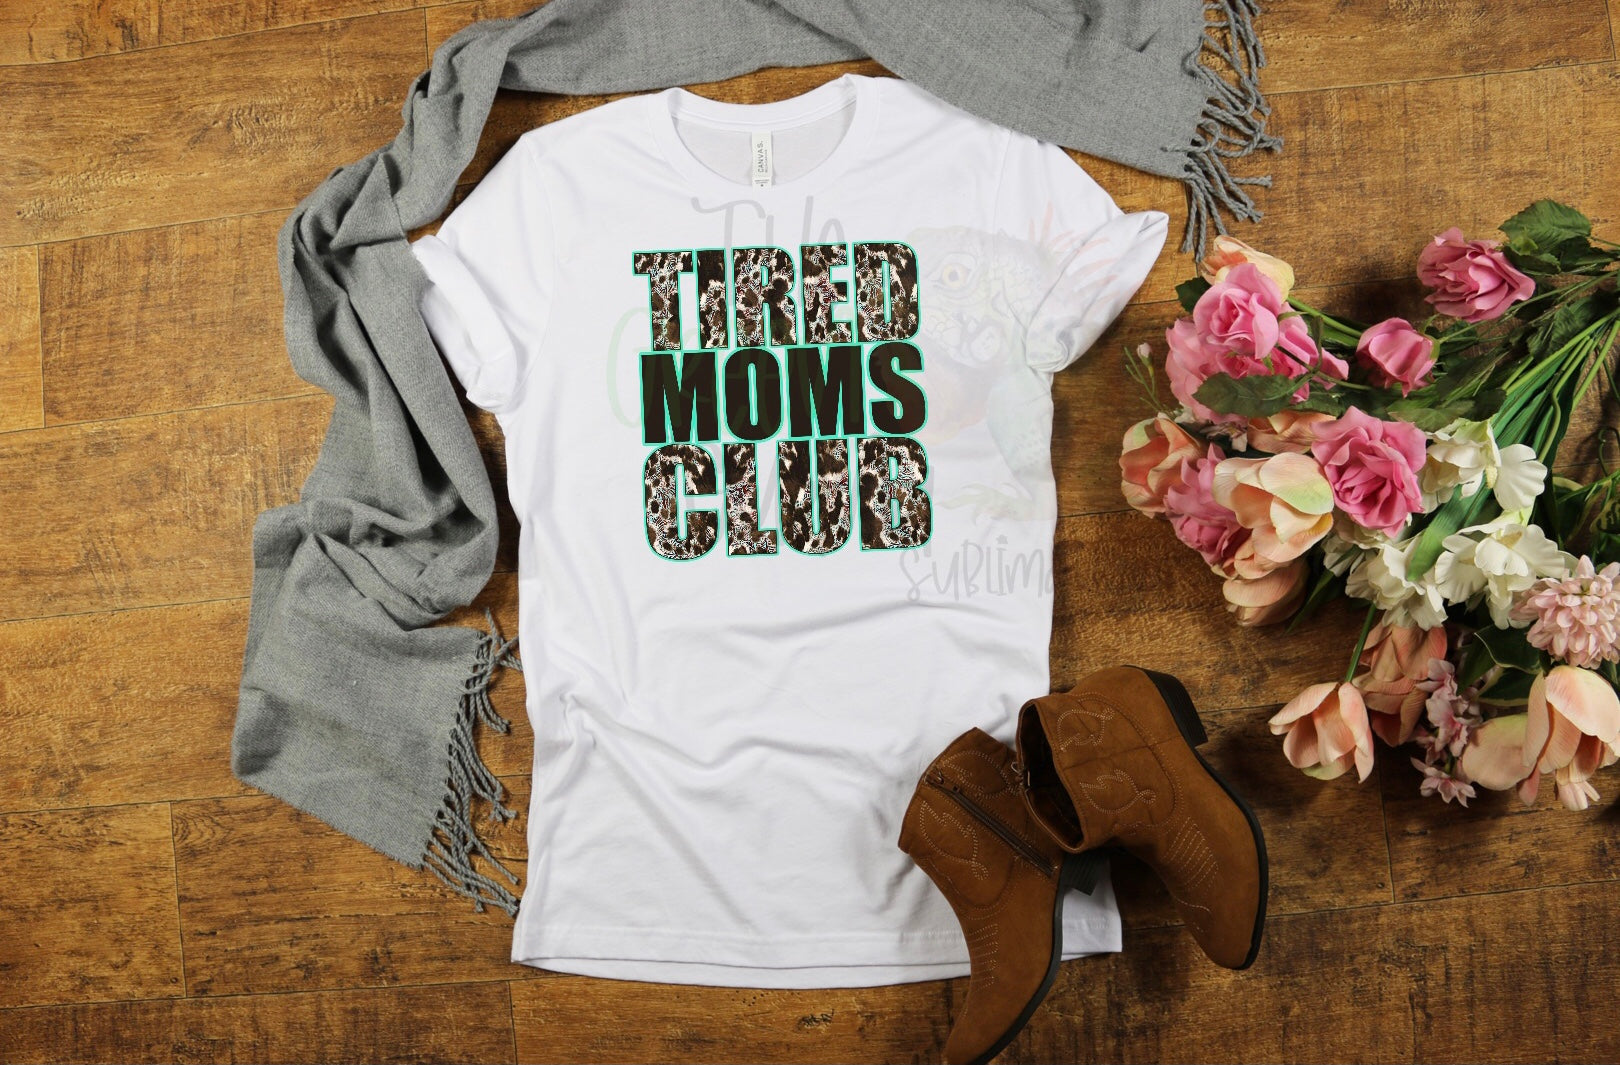 Tired moms club